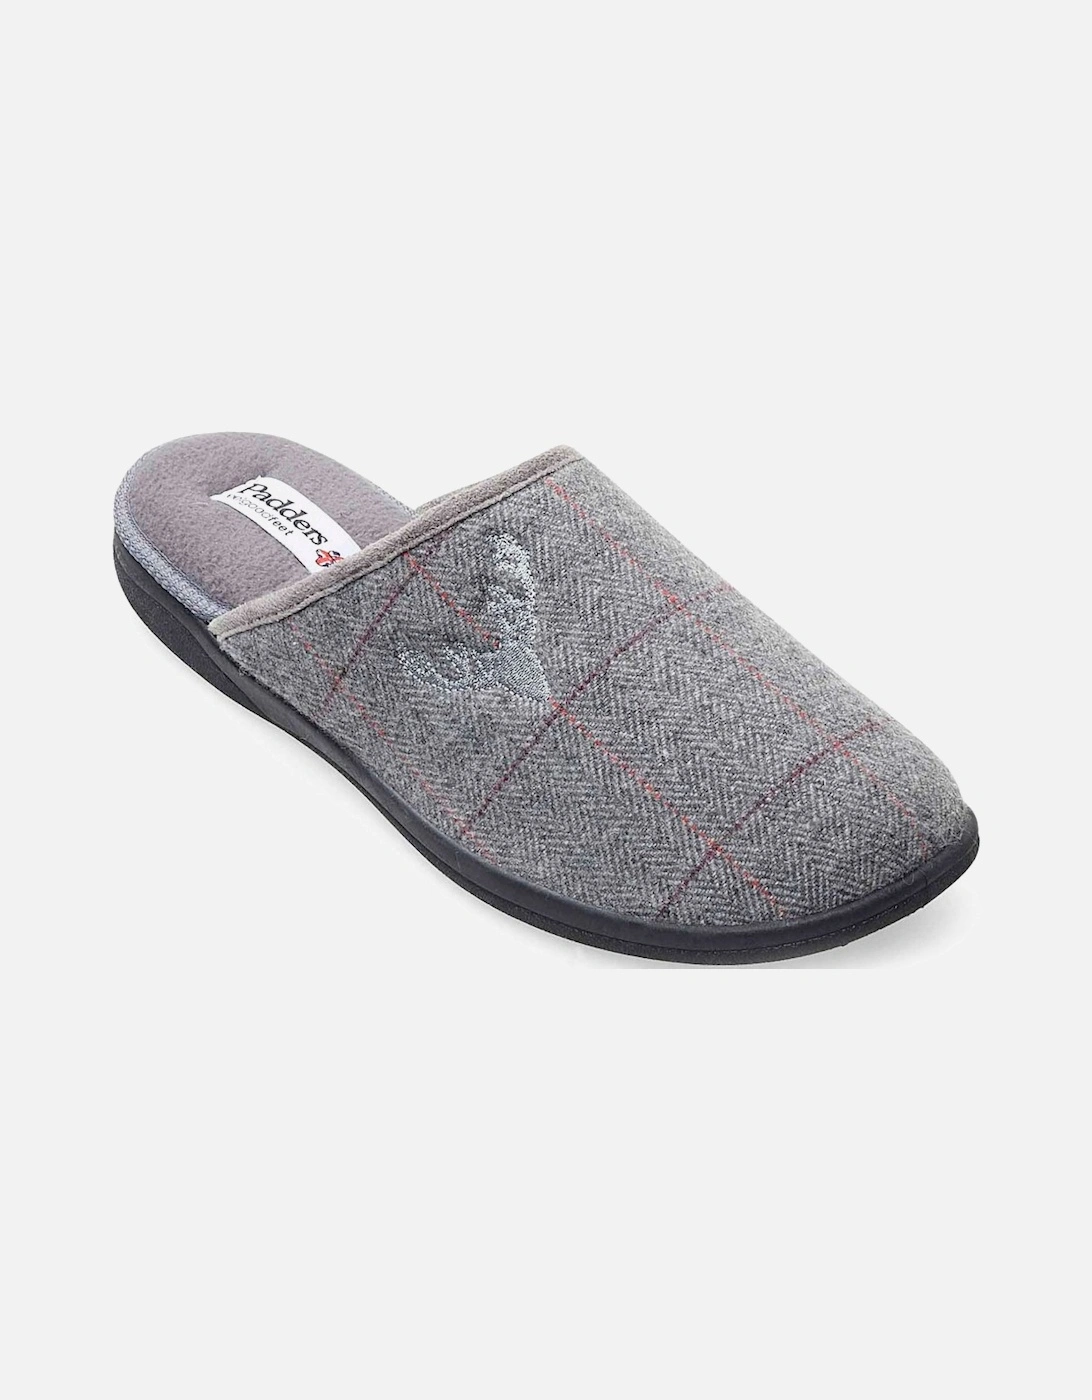 Stag Motif Mens Slippers